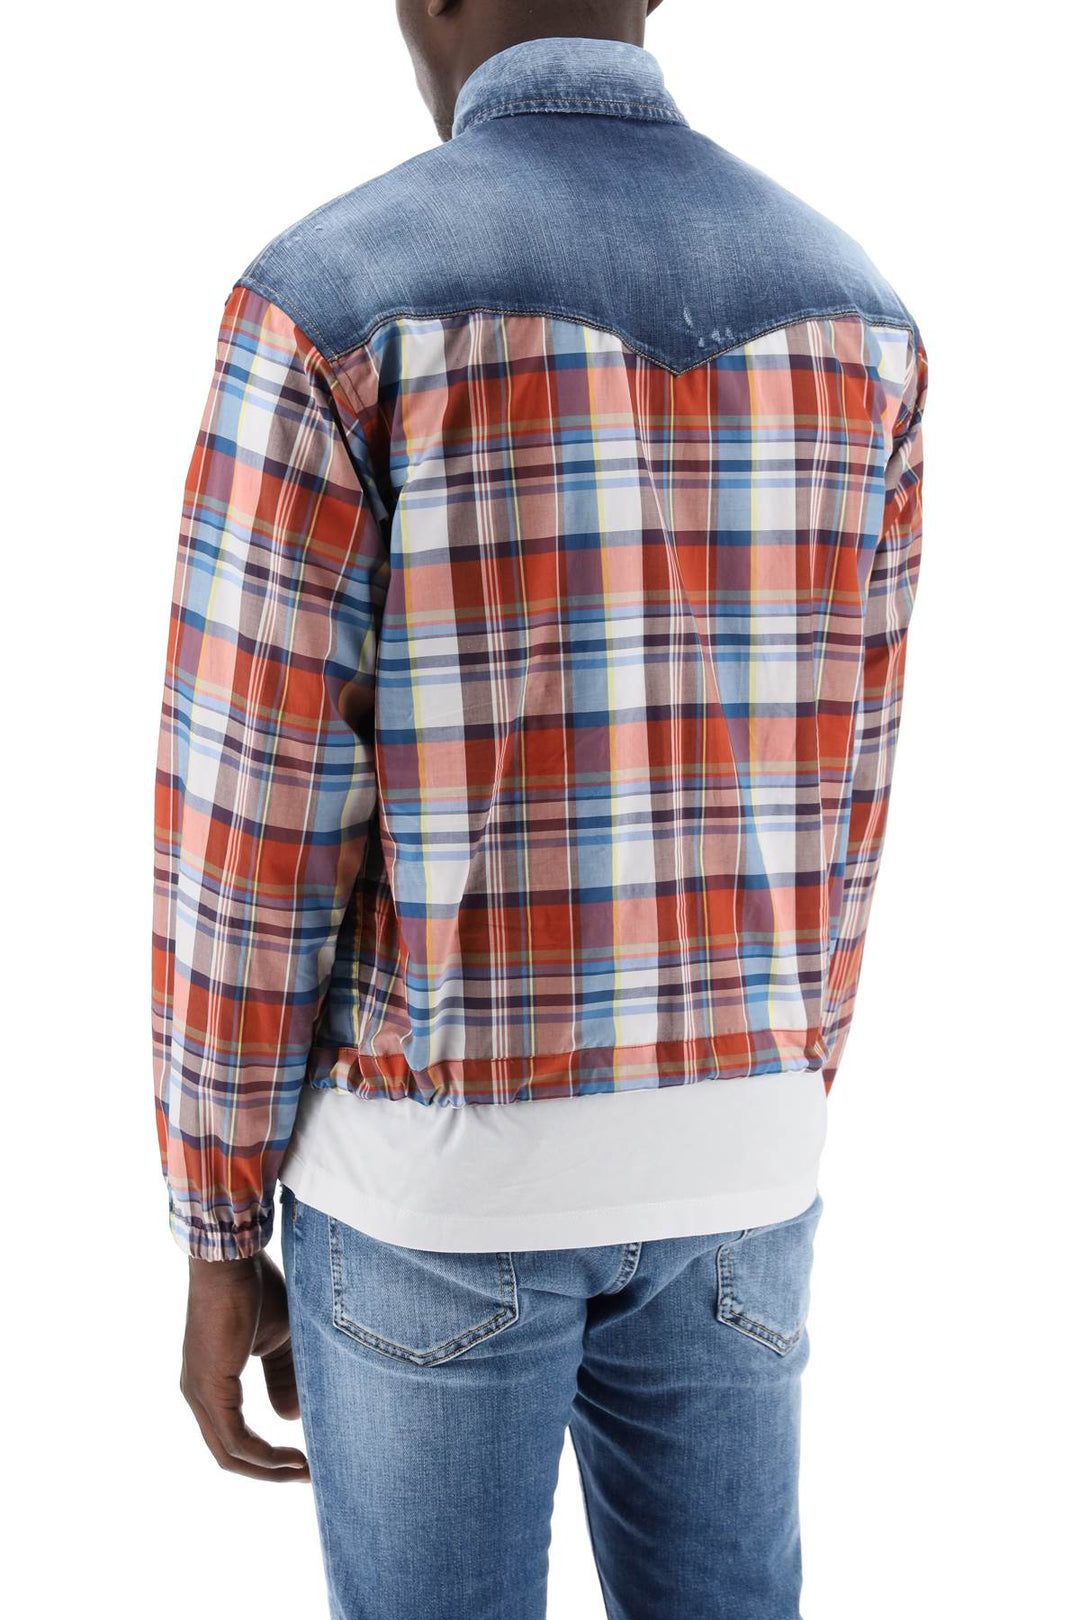 Dsquared2 Plaid Western Shirt With Denim Inserts   Rosso